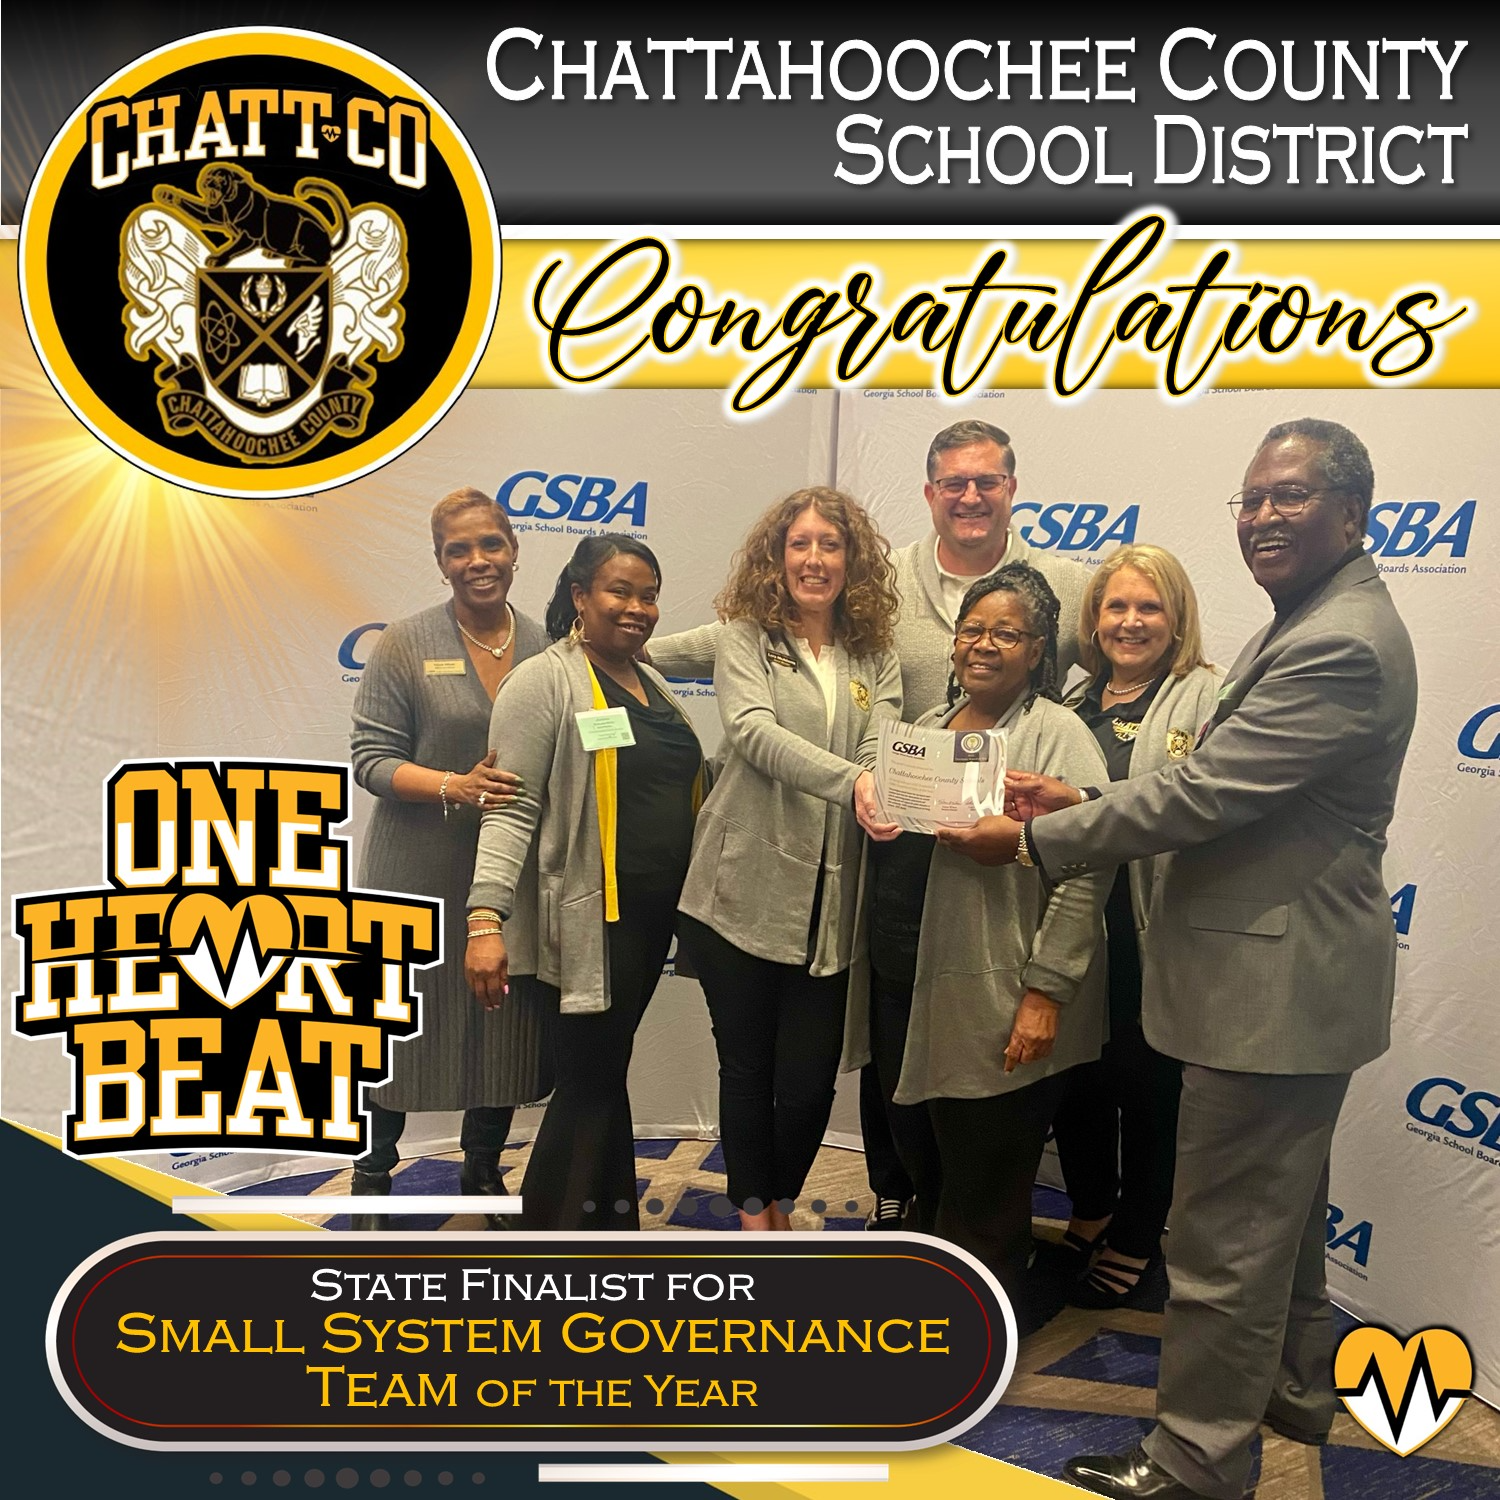 school board named State Finalist for Small System Governance Team of the Year